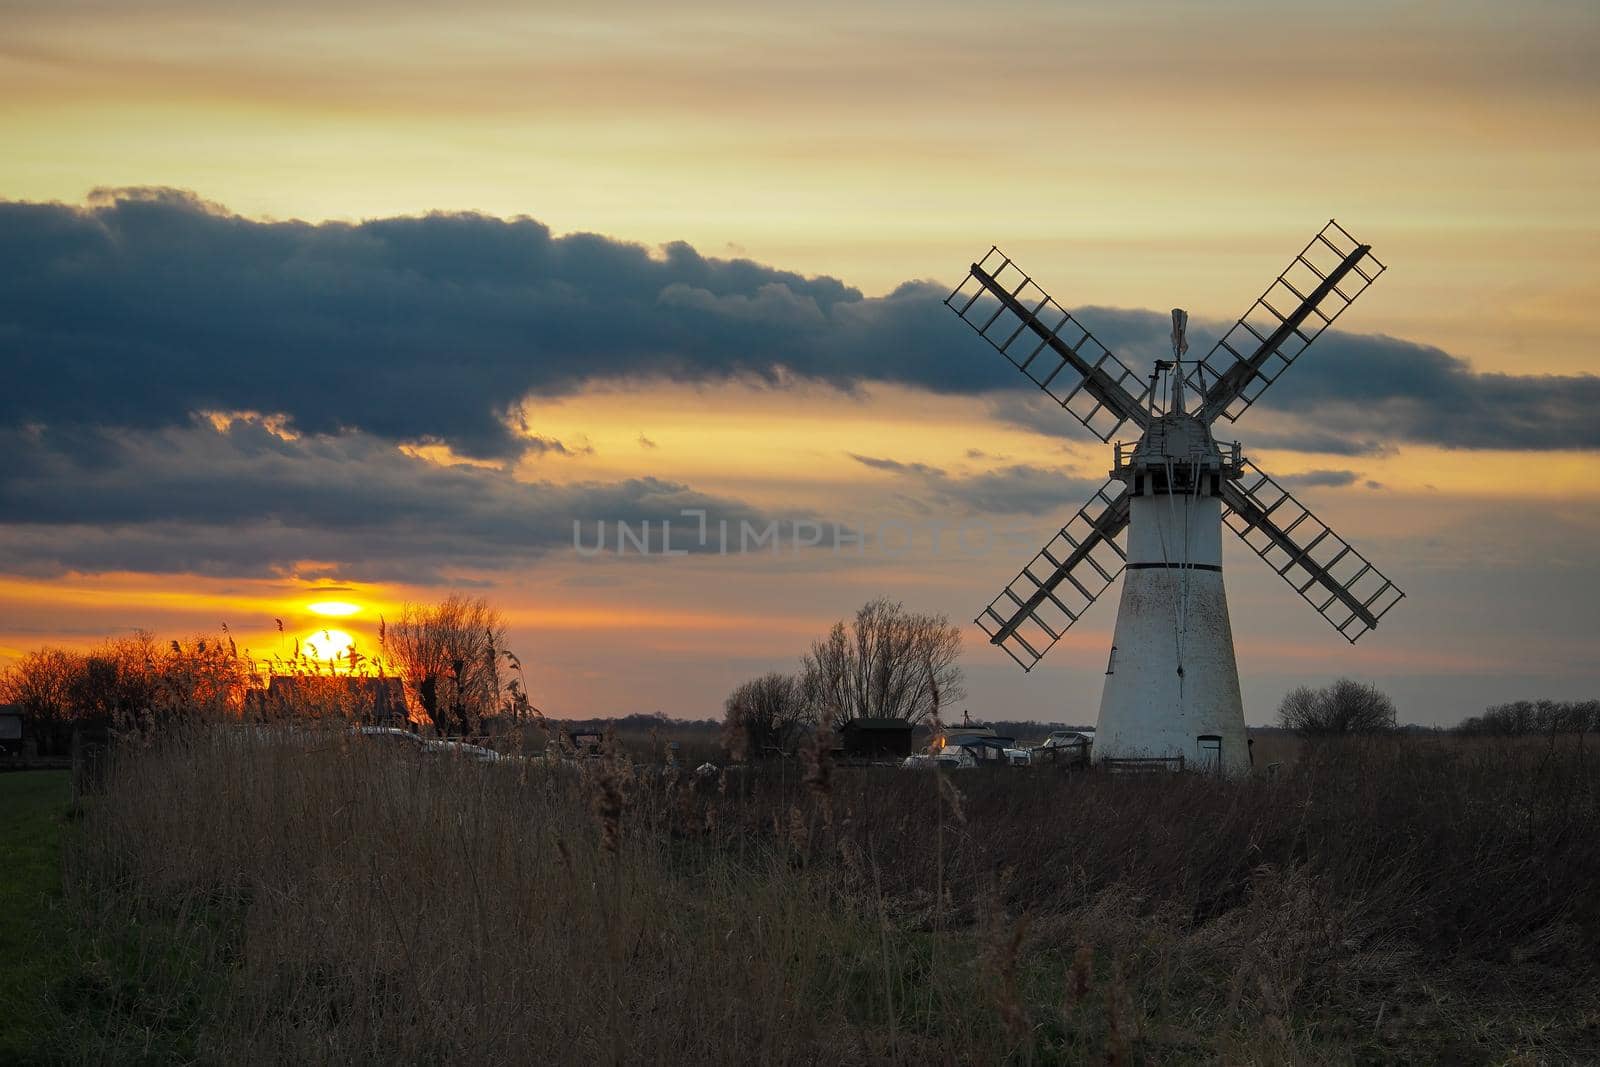 Beautiful orange sunset lighting up the clouds over Thurne Dyke Drainage Mill set in The Broads, near Great, Yarmouth, Norfolk, UK